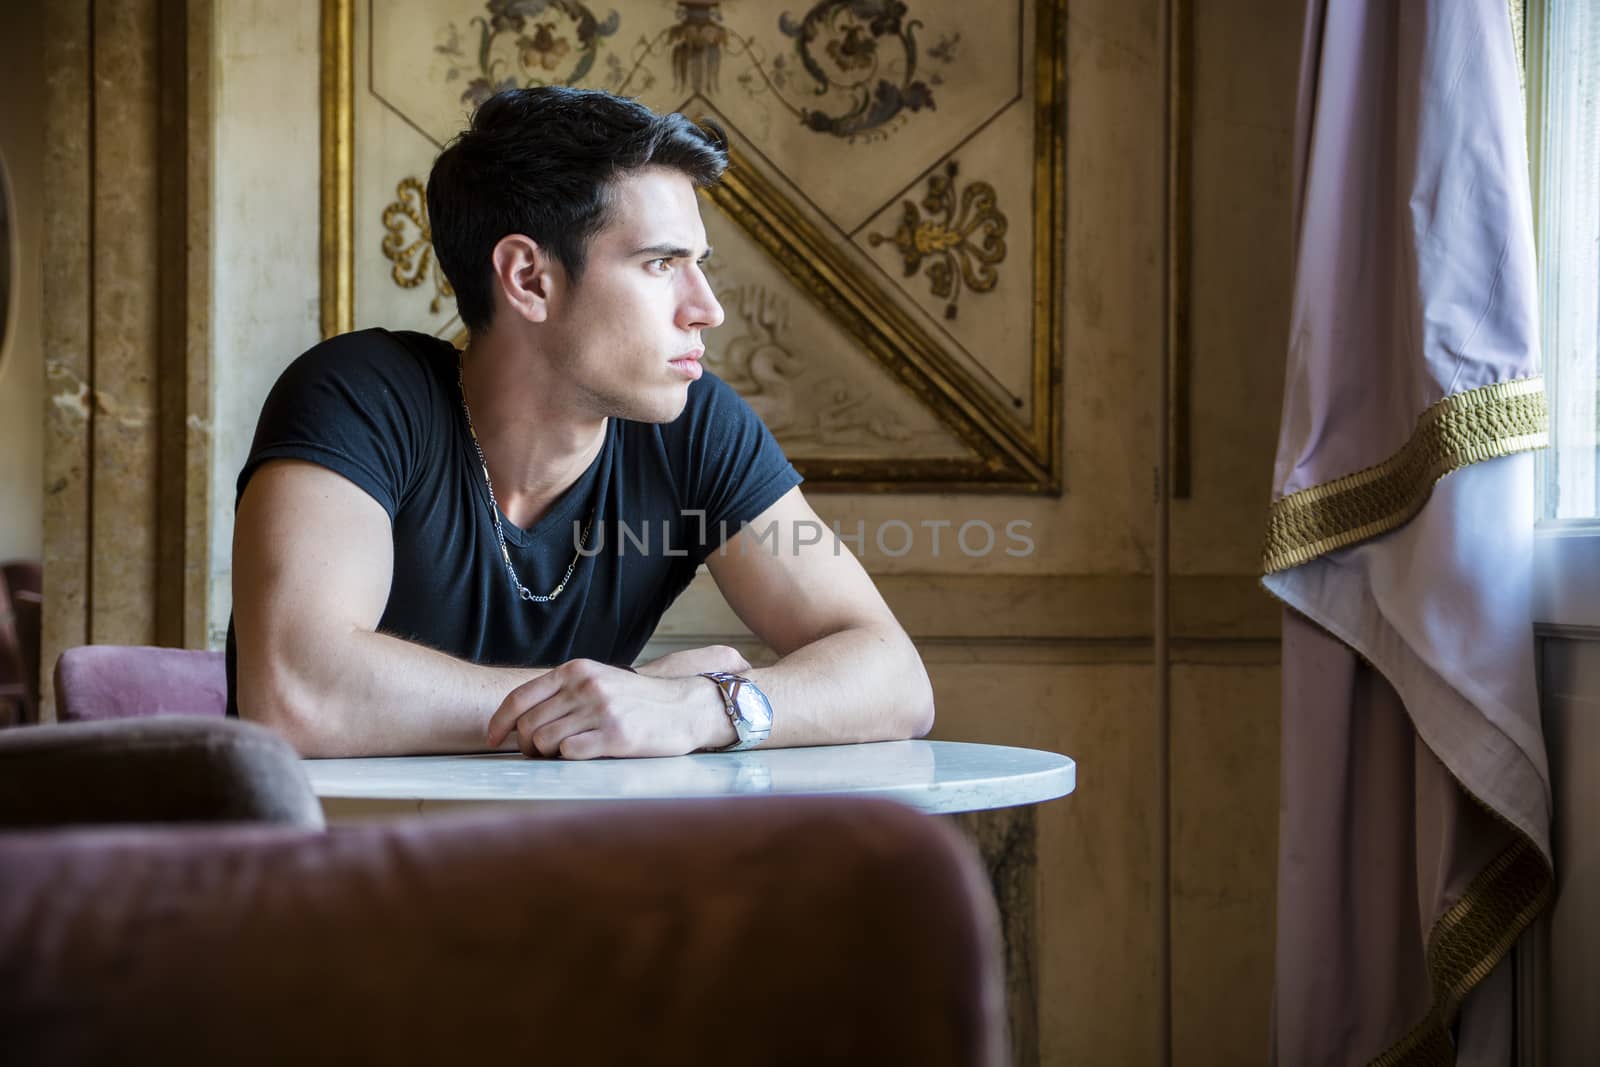 Portrait of Serious Attractive Young Man Sitting at Table Leaning on it and Looking Away, in Room Decorated with Gold Framed Artwork